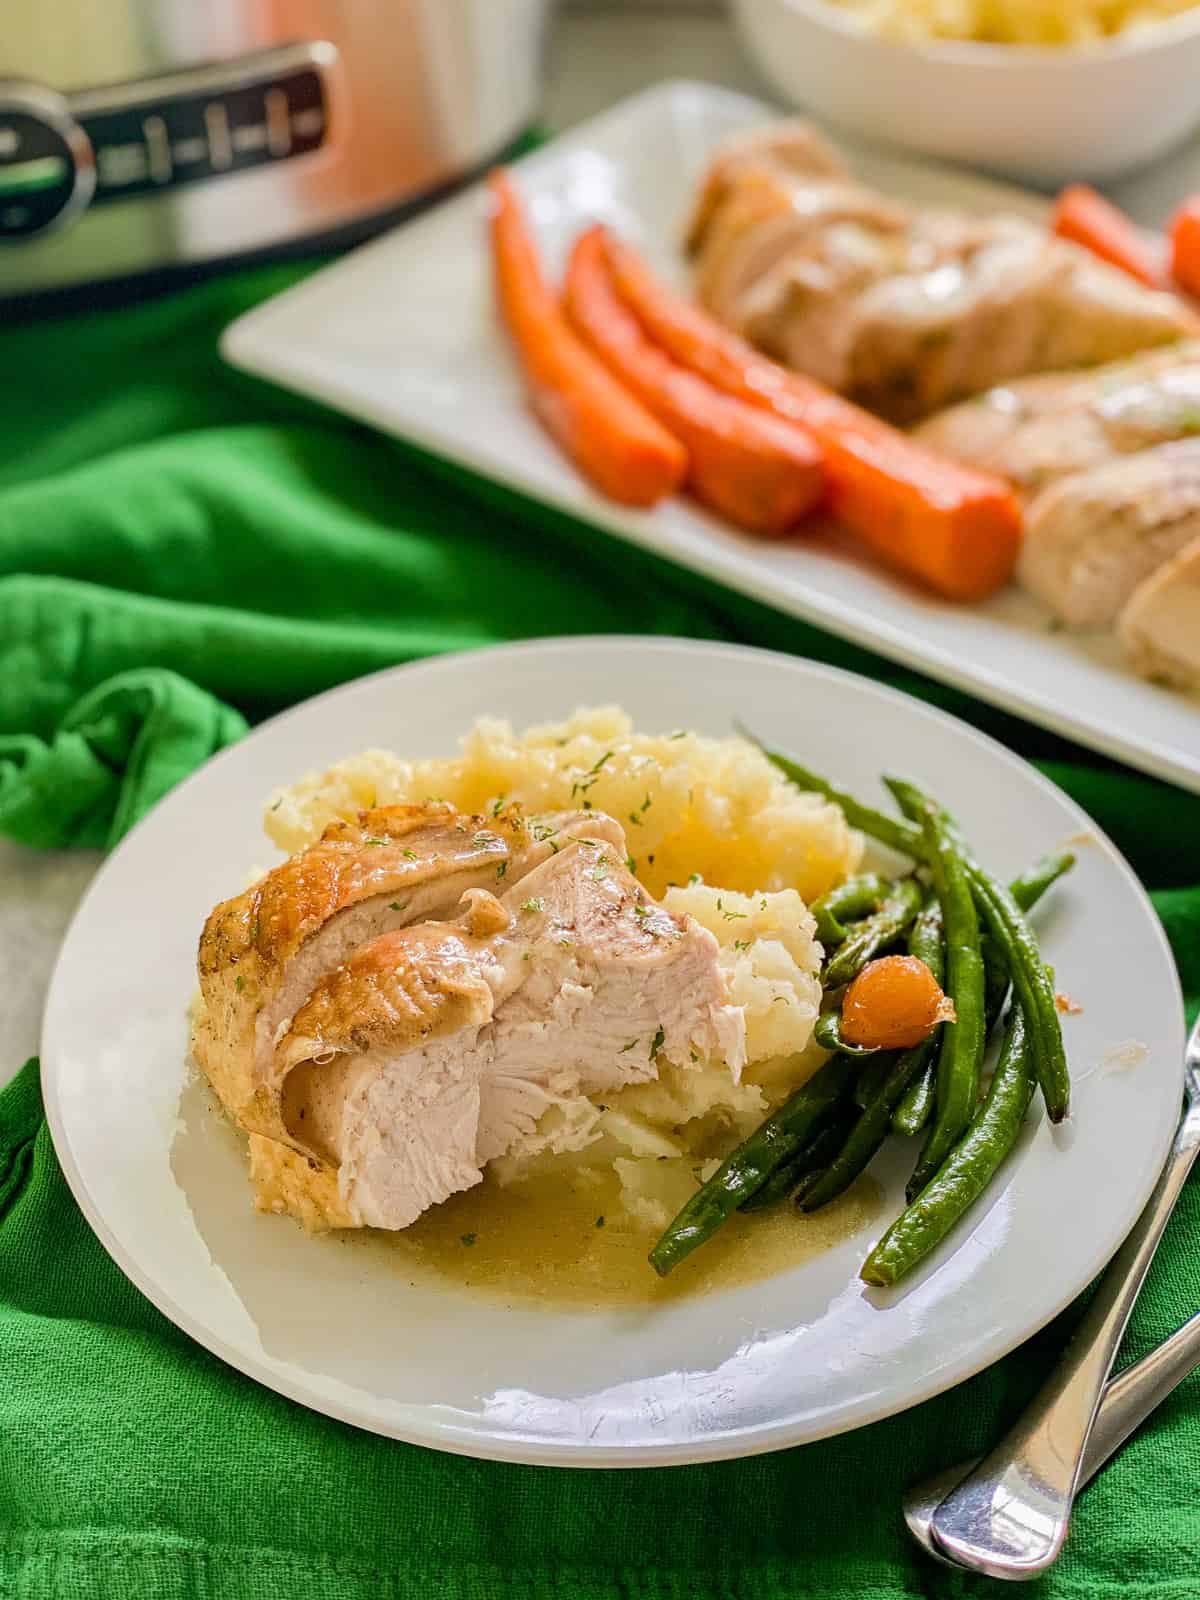 White dish on a green cloth filled with turkey, mashed potatoes, and green beans.